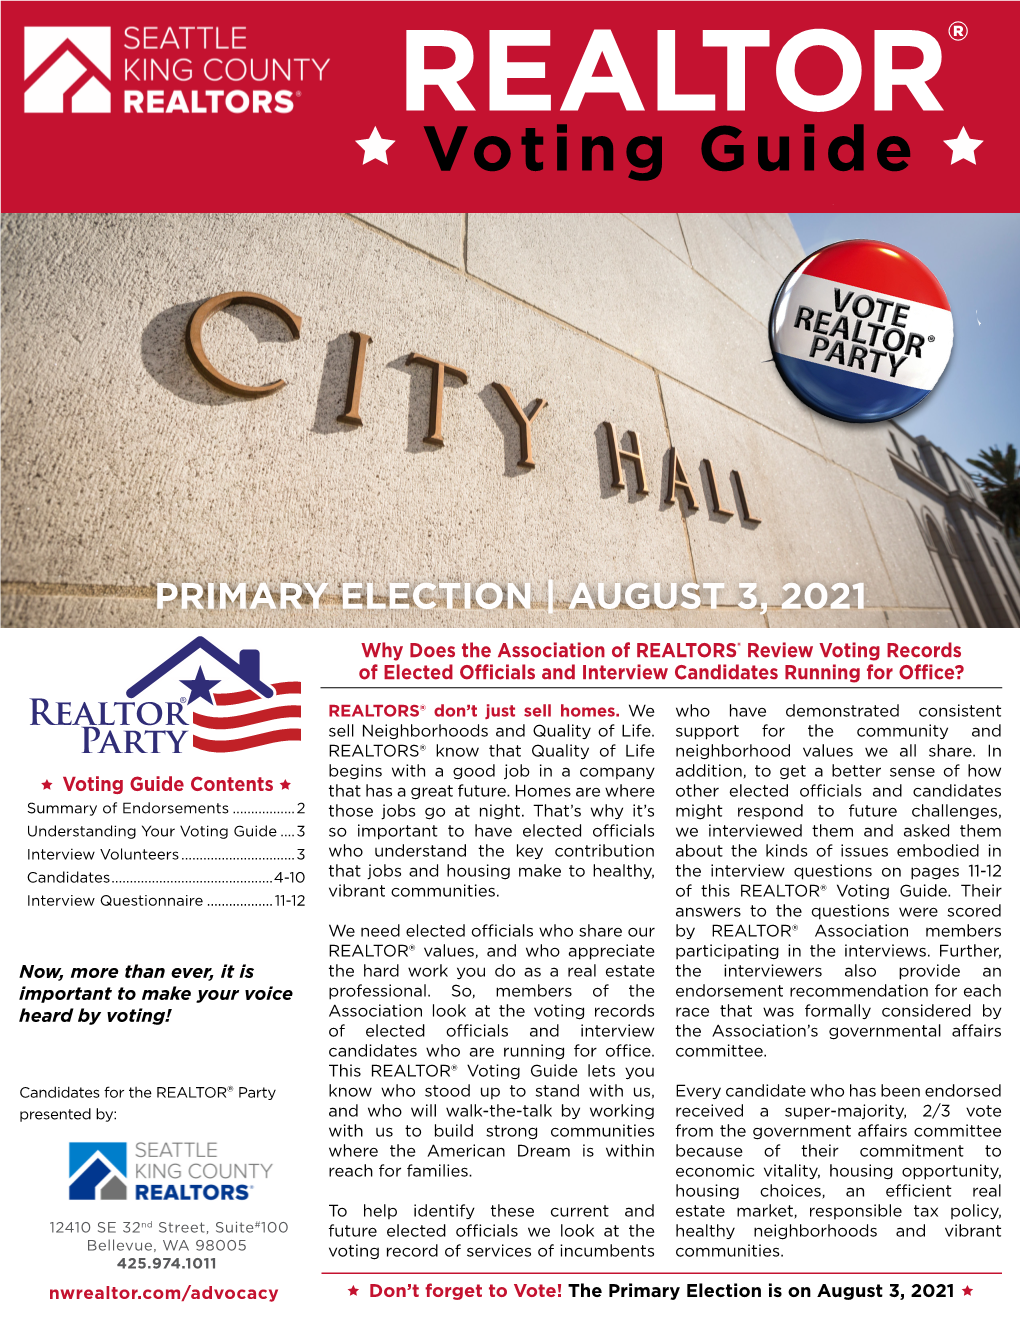 View 2021 Primary Election Voting Guide